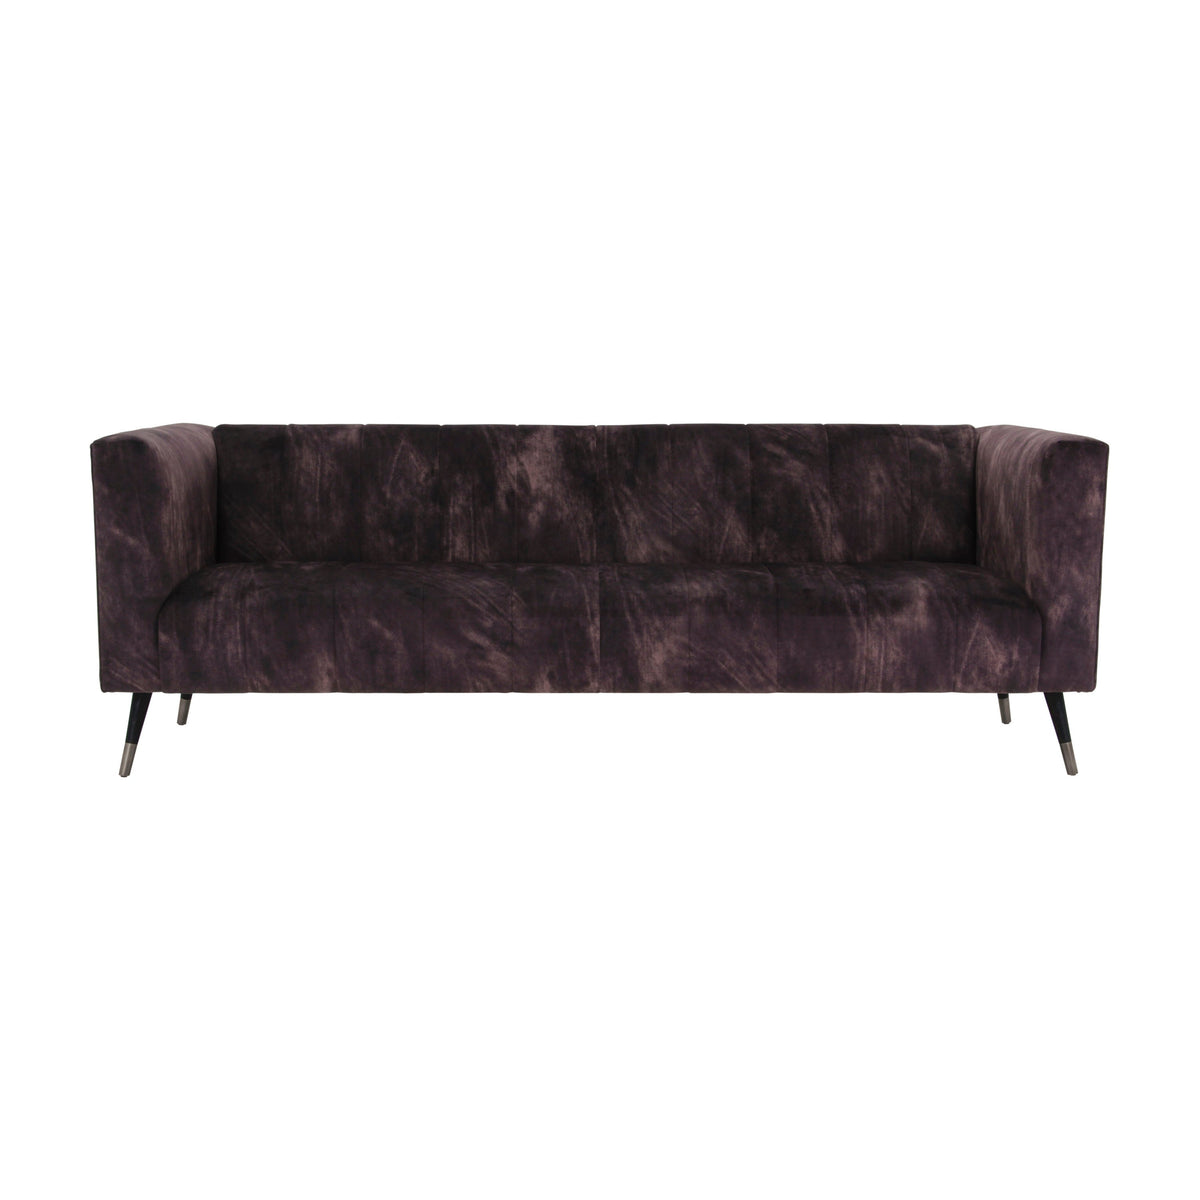 Nubes Sofa-Seven Sedie-Contract Furniture Store